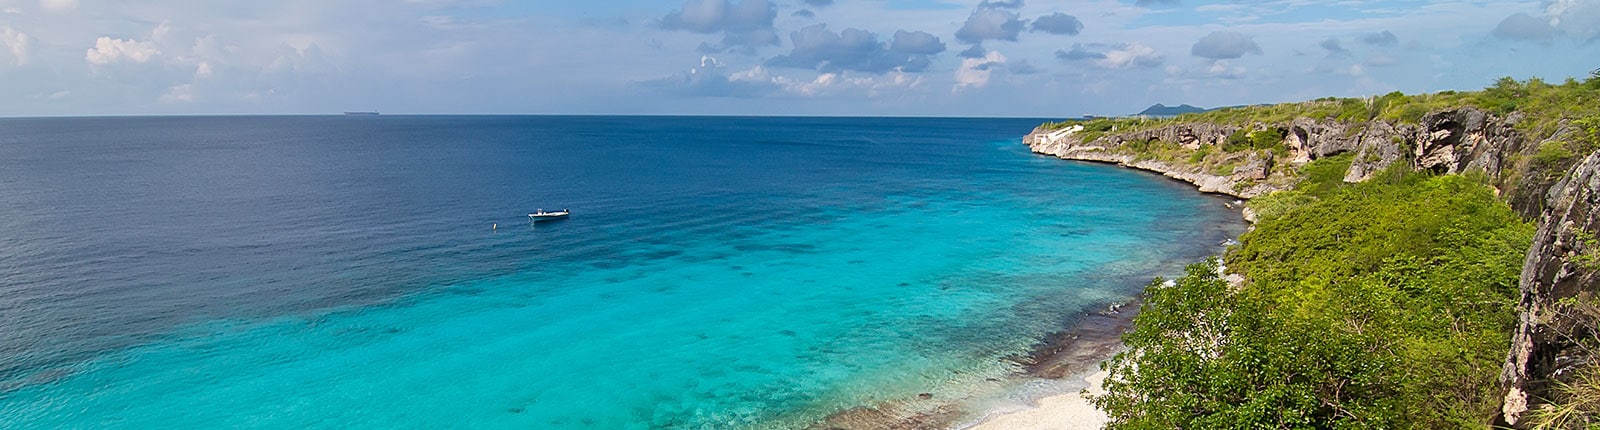 Natural coastline where the water meets the land in Bonaire